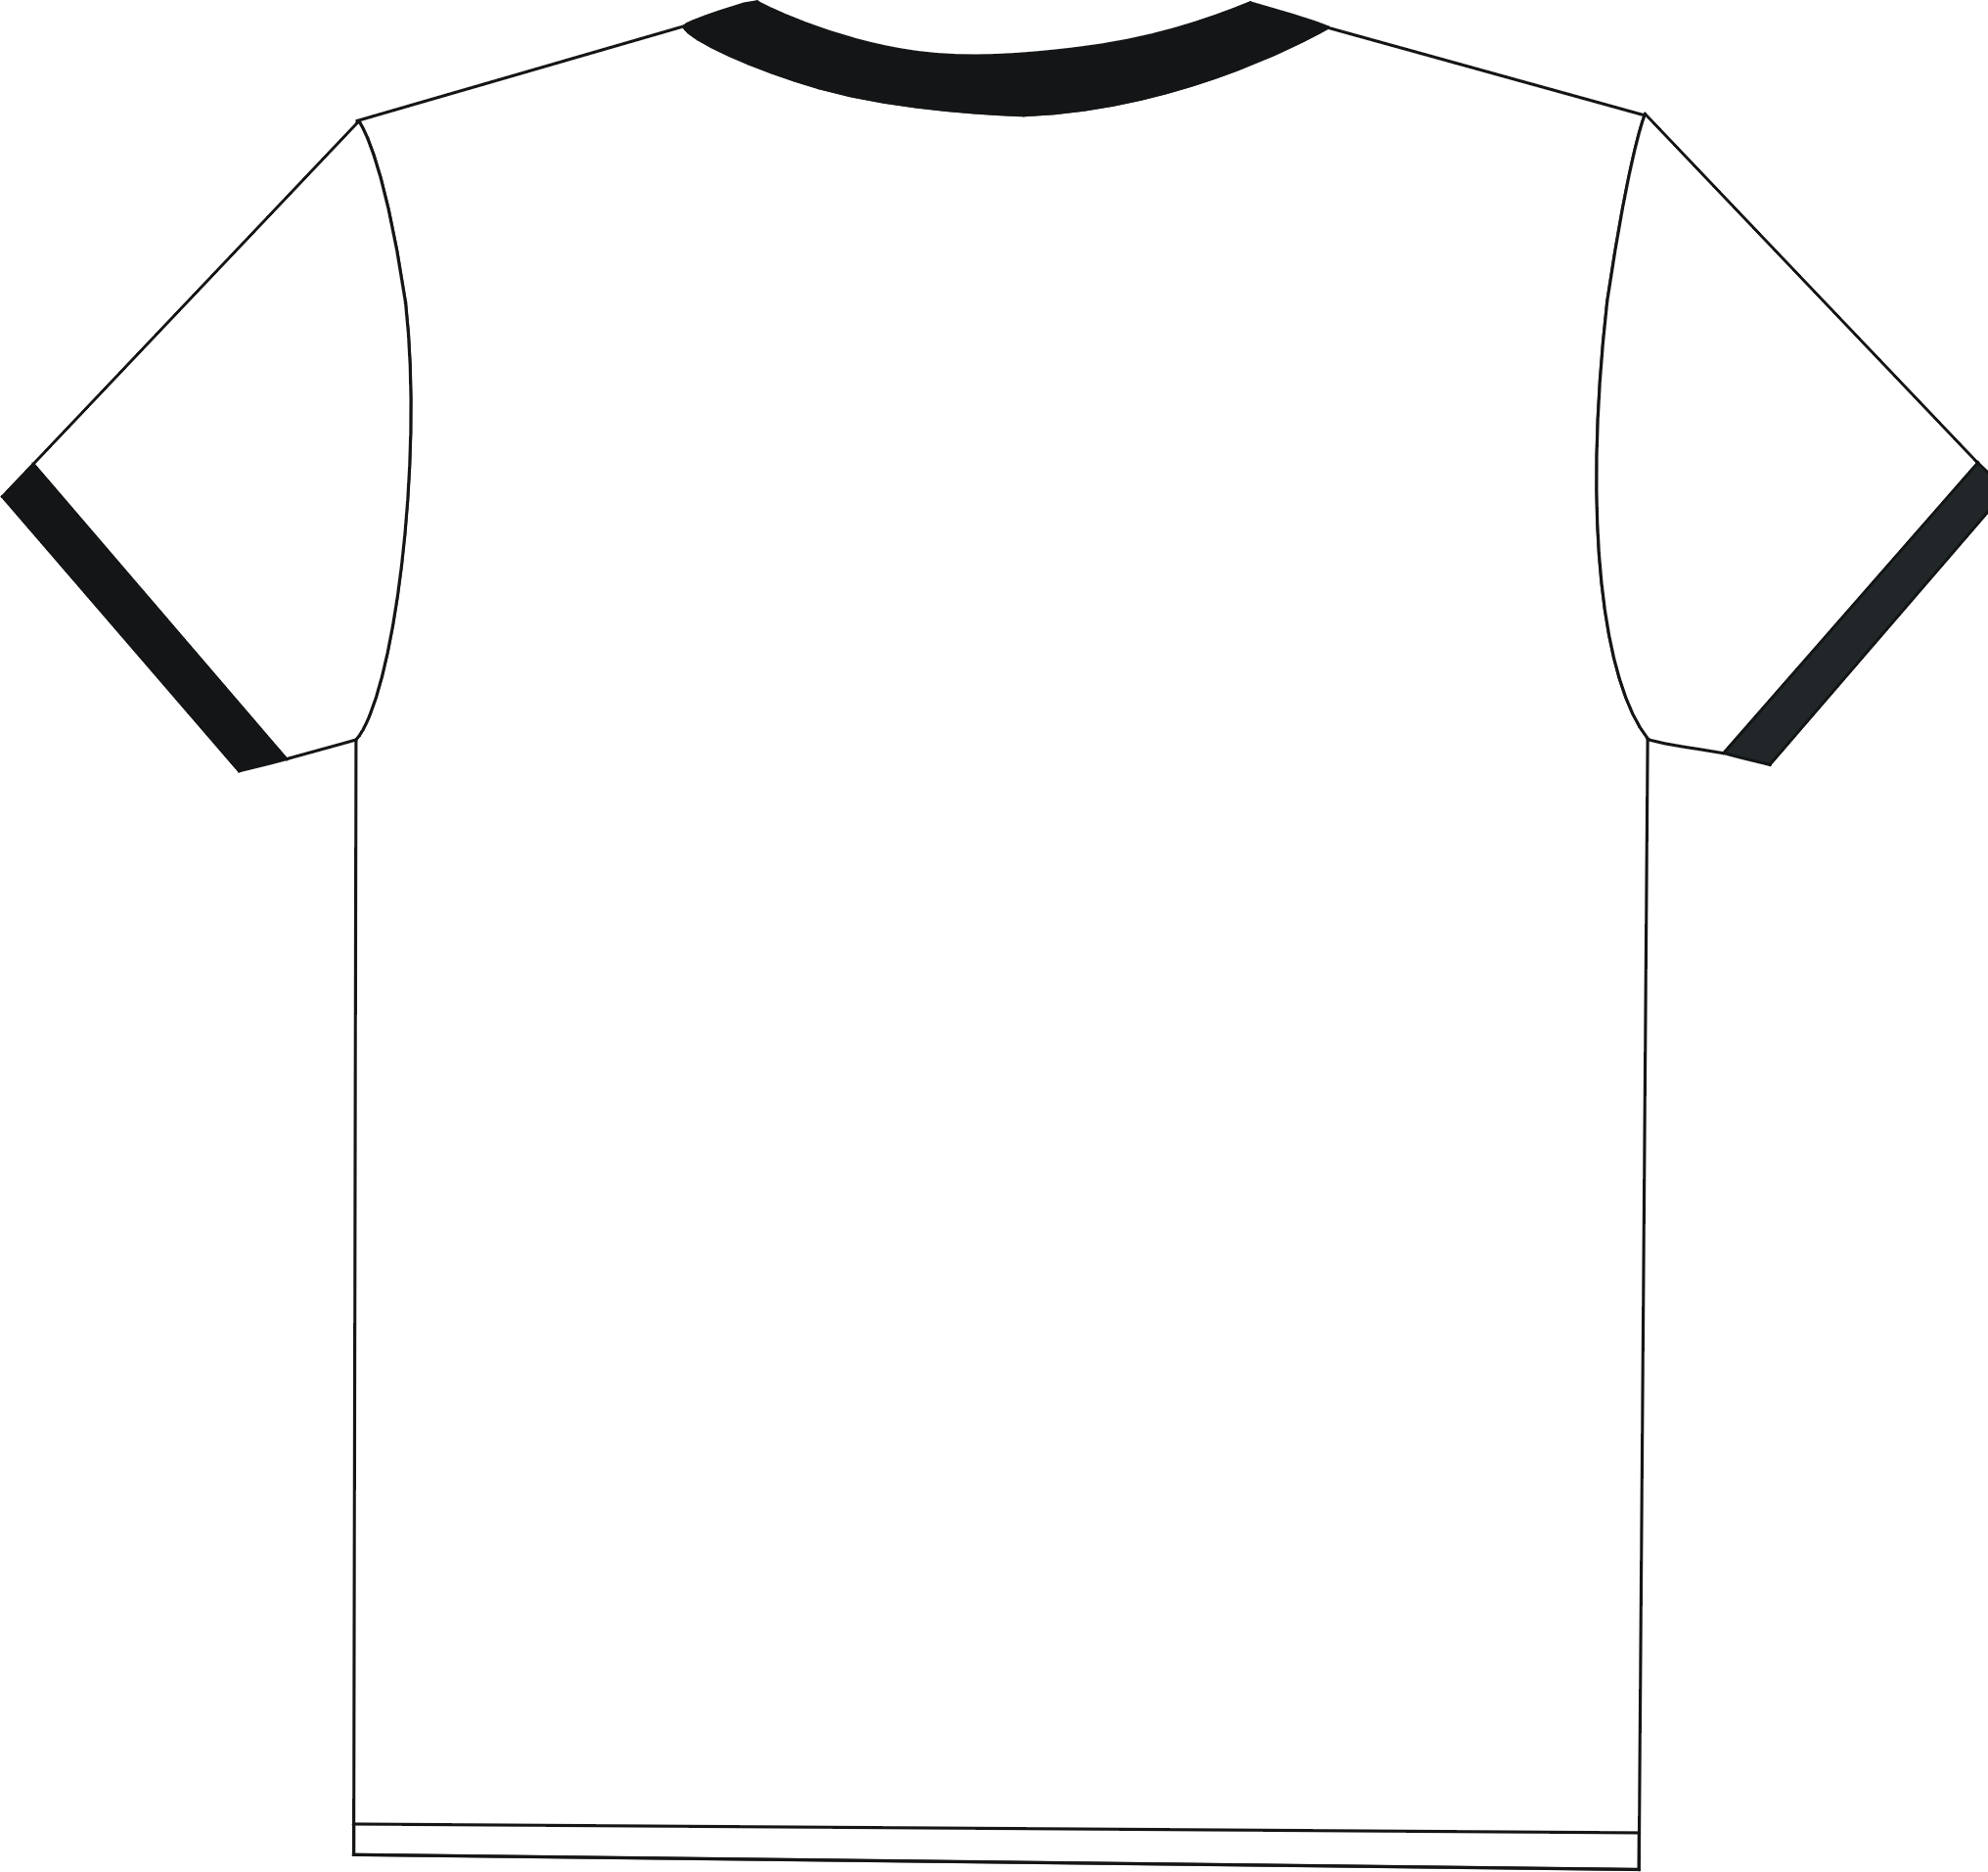 Plain White T Shirt Png Hd - Plain white t shirts is one of the clipart ...